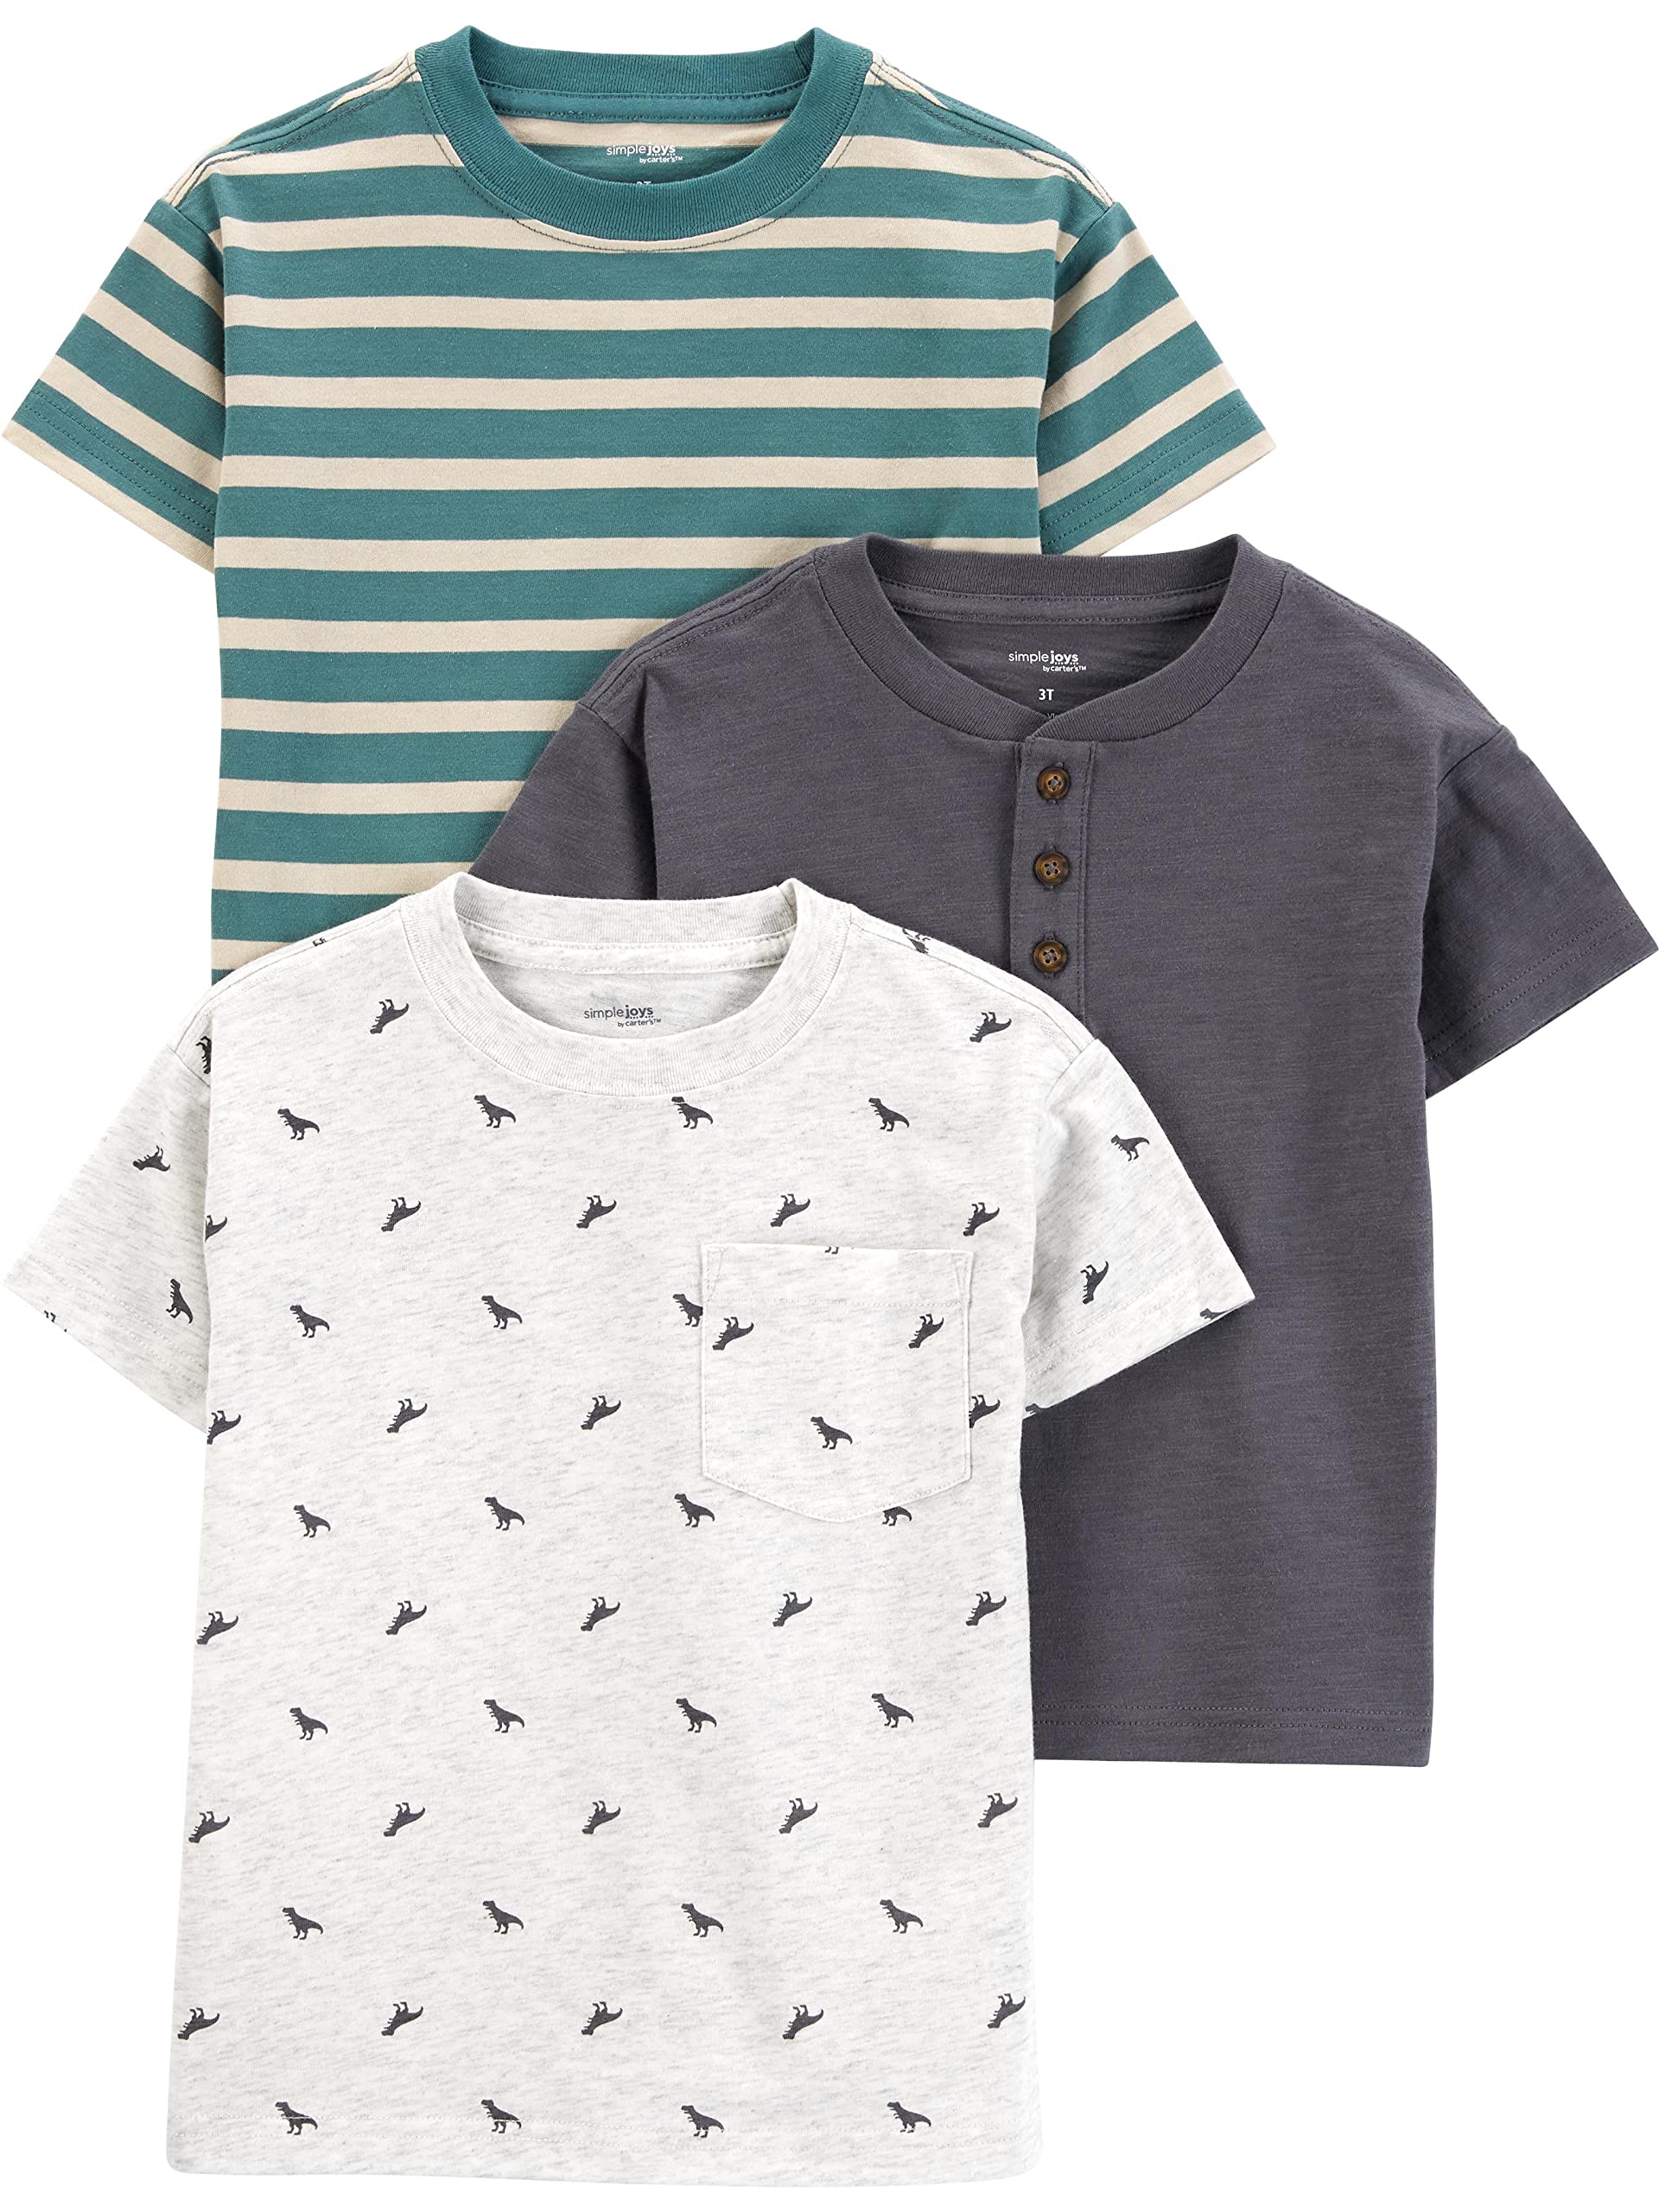 Simple Joys by Carter's Babies, Toddlers, and Boys' Short-Sleeve Shirts, Pack of 3